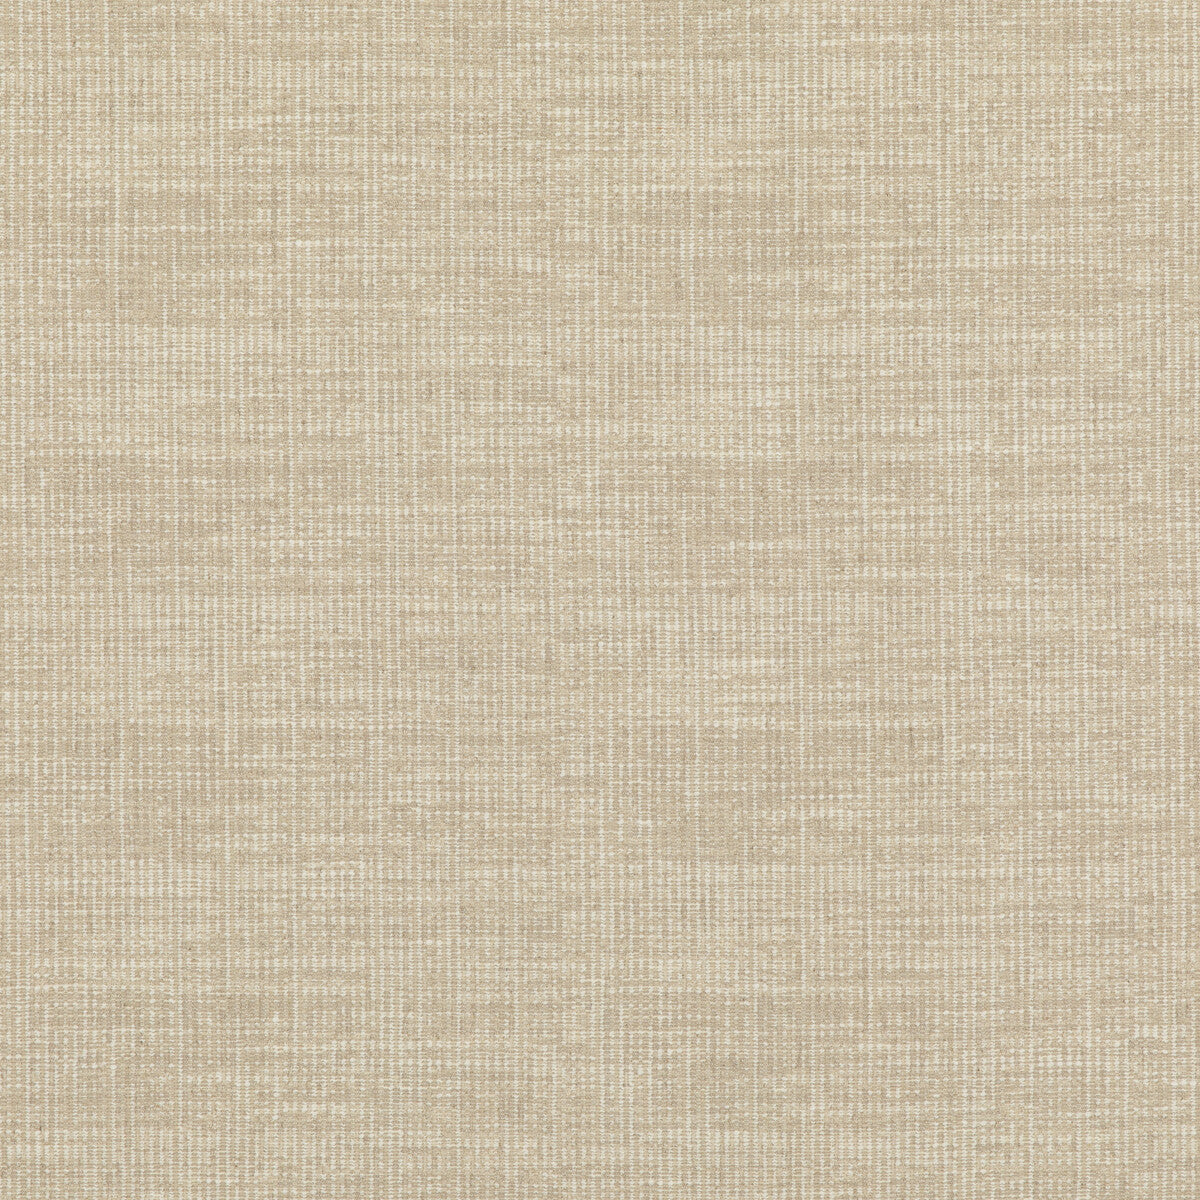 Umbra fabric in ivory color - pattern ED85327.104.0 - by Threads in the Luxury Weaves II collection